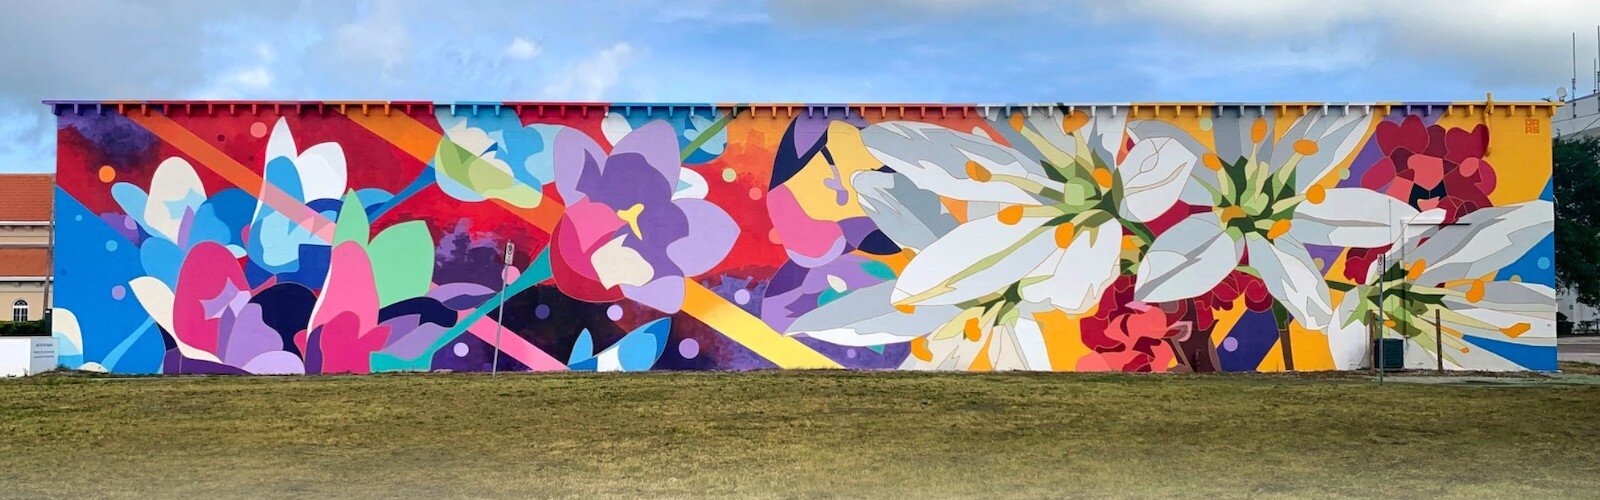 DAAS’ mural in his Ikebana Series, “Lily, Periwinkle & Jatropha,” which can be found at 701 Franklin St. in Clearwater.